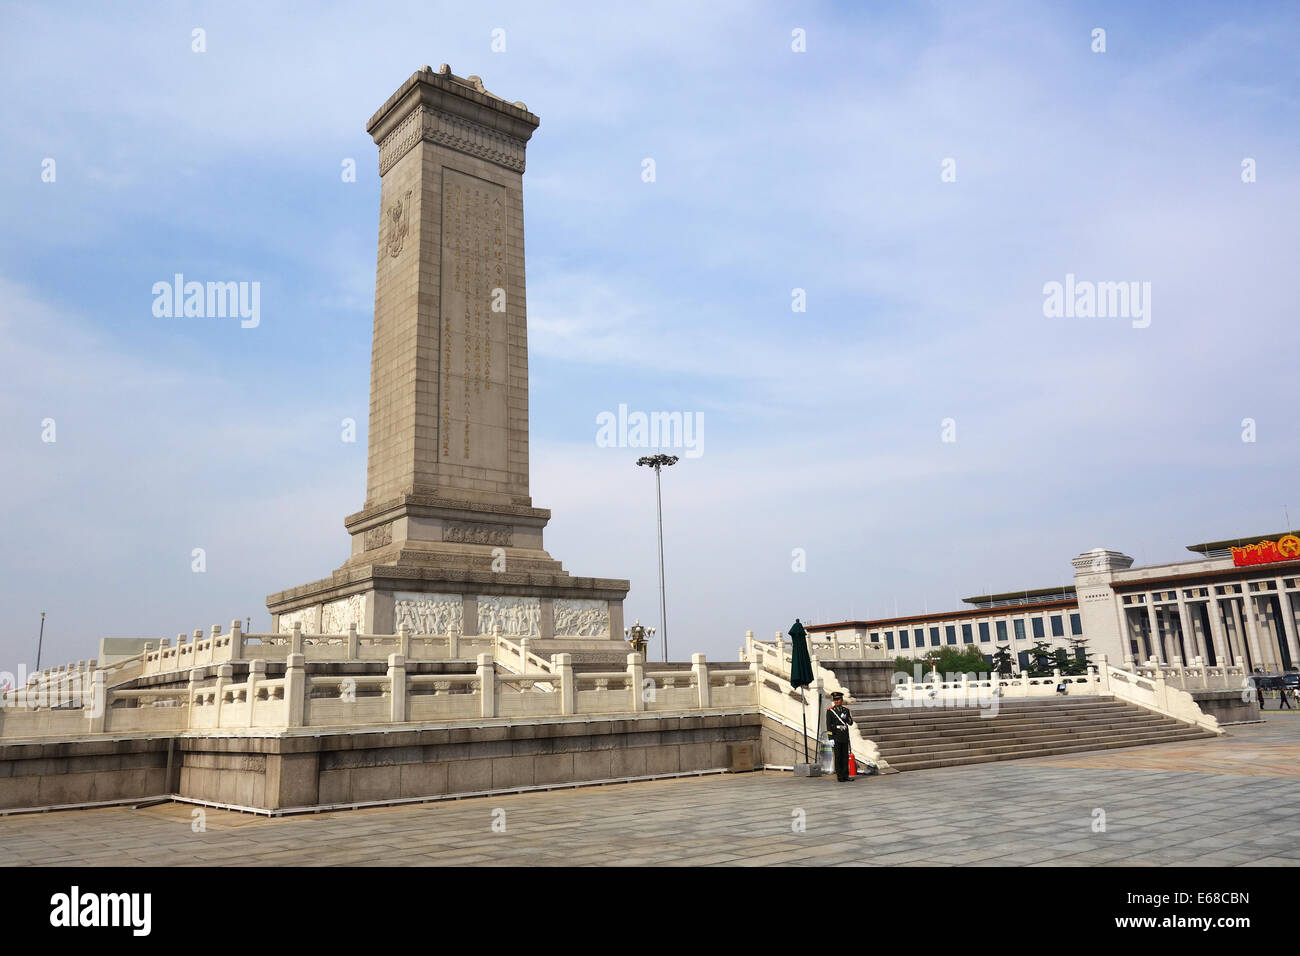 Monument to the People's Heroes, Tiananmen Square, Beijing, China, Asia Stock Photo